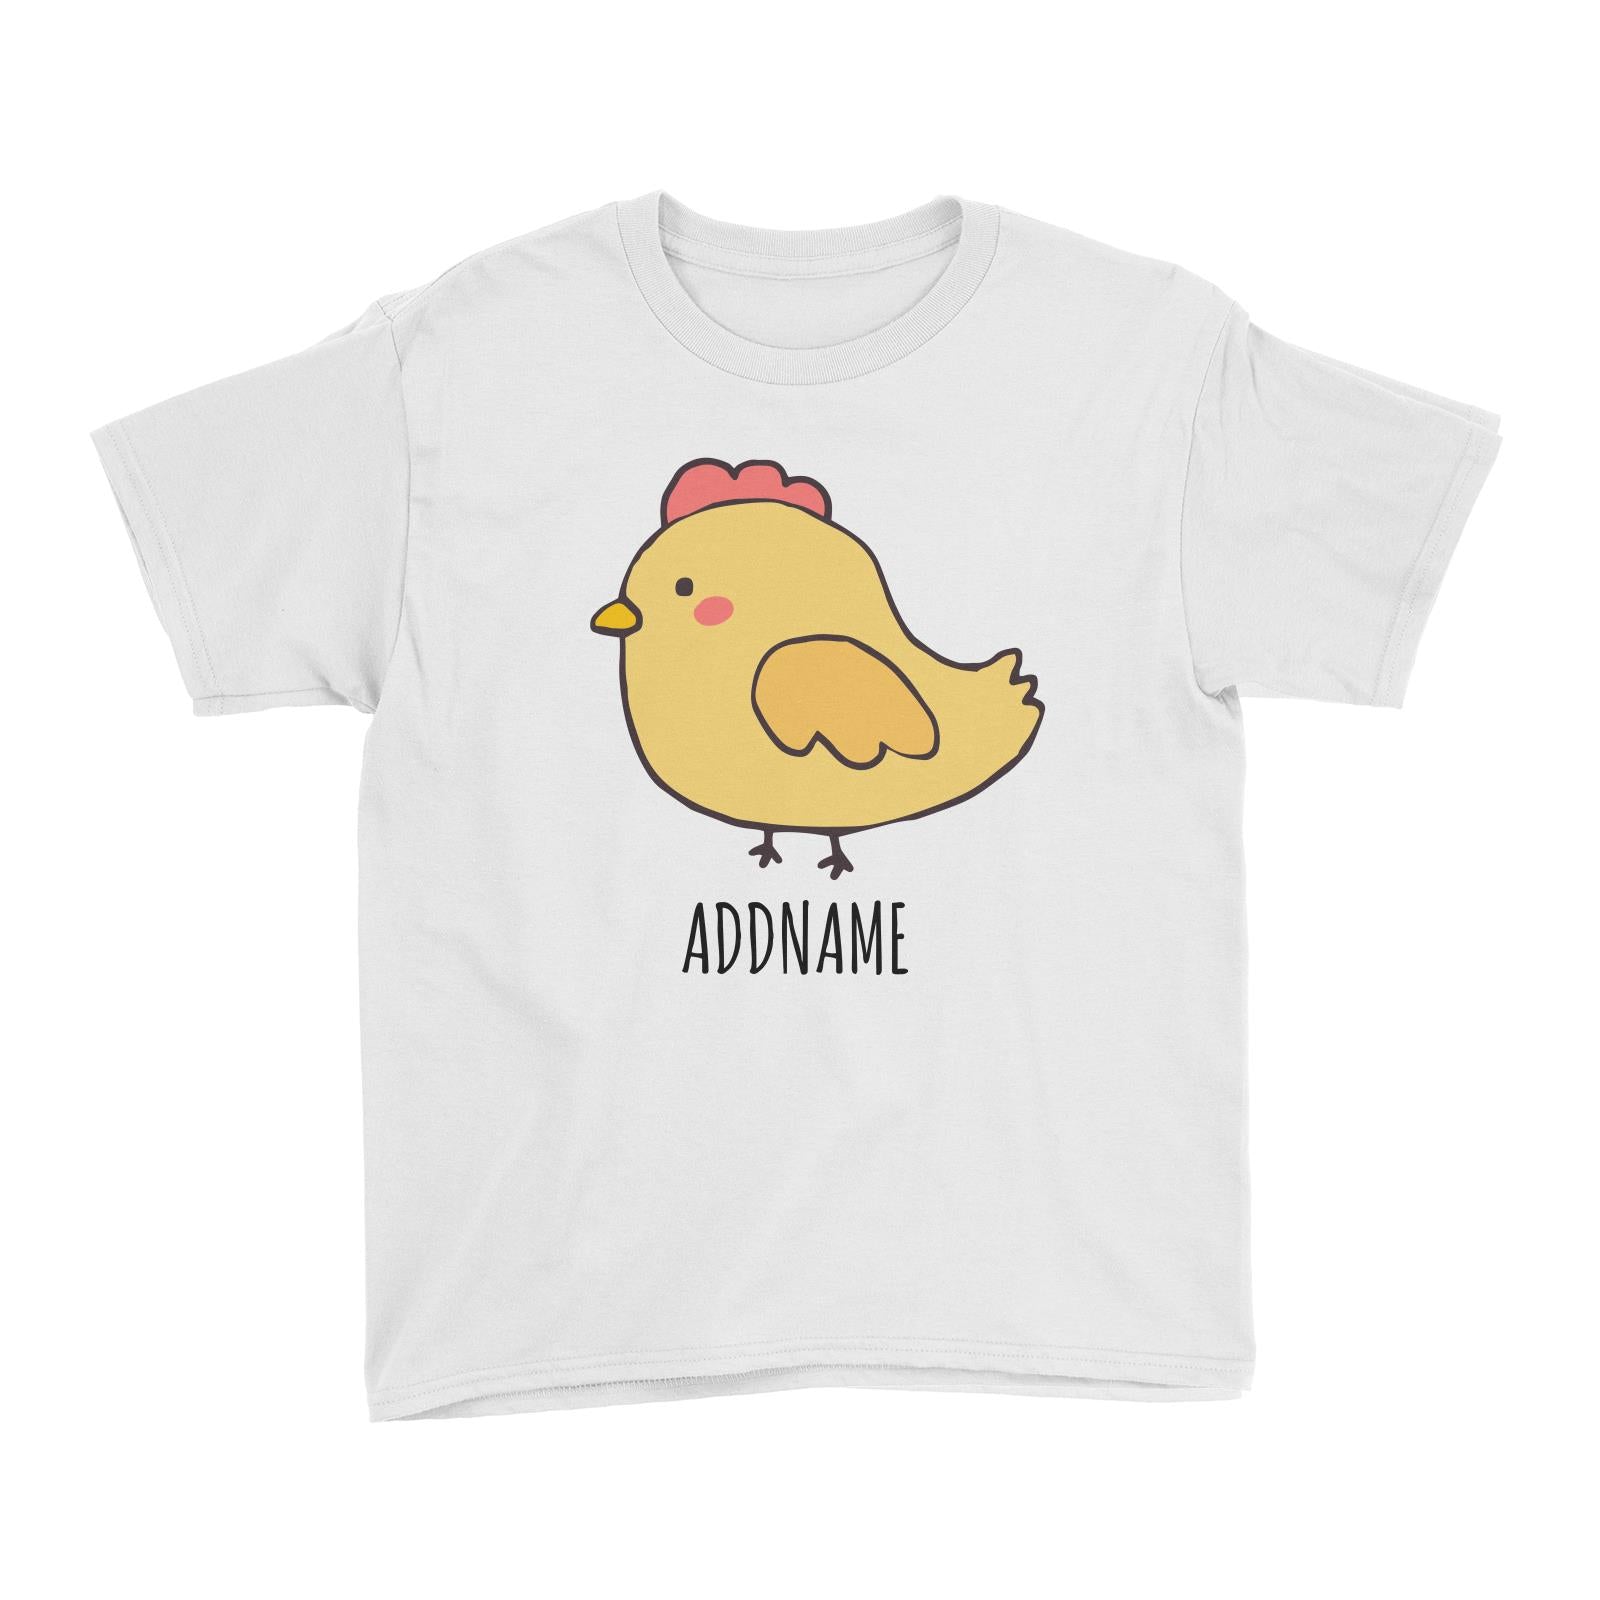 Cartoon Kawaii Chicken Doodle White White Kid's T-Shirt  Matching Family Personalizable Designs